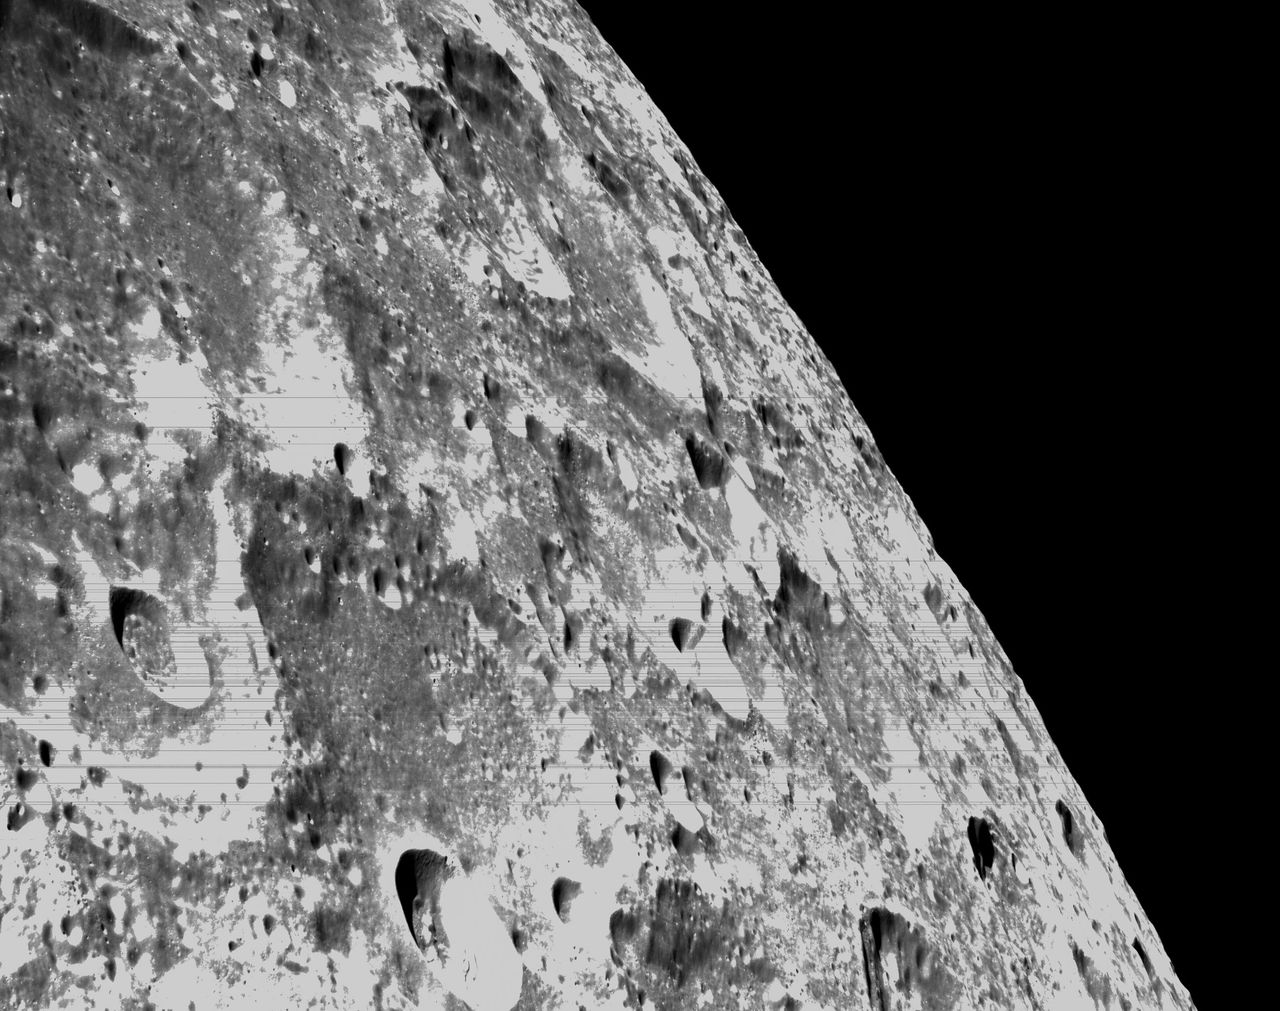 On the sixth day of the Artemis I mission, Orion’s optical navigation camera captured black-and-white images of craters on the moon. Its task is to take pictures of the moon at different phases and distances; the data on the different lighting conditions should be useful in aiding navigation with humans later on.